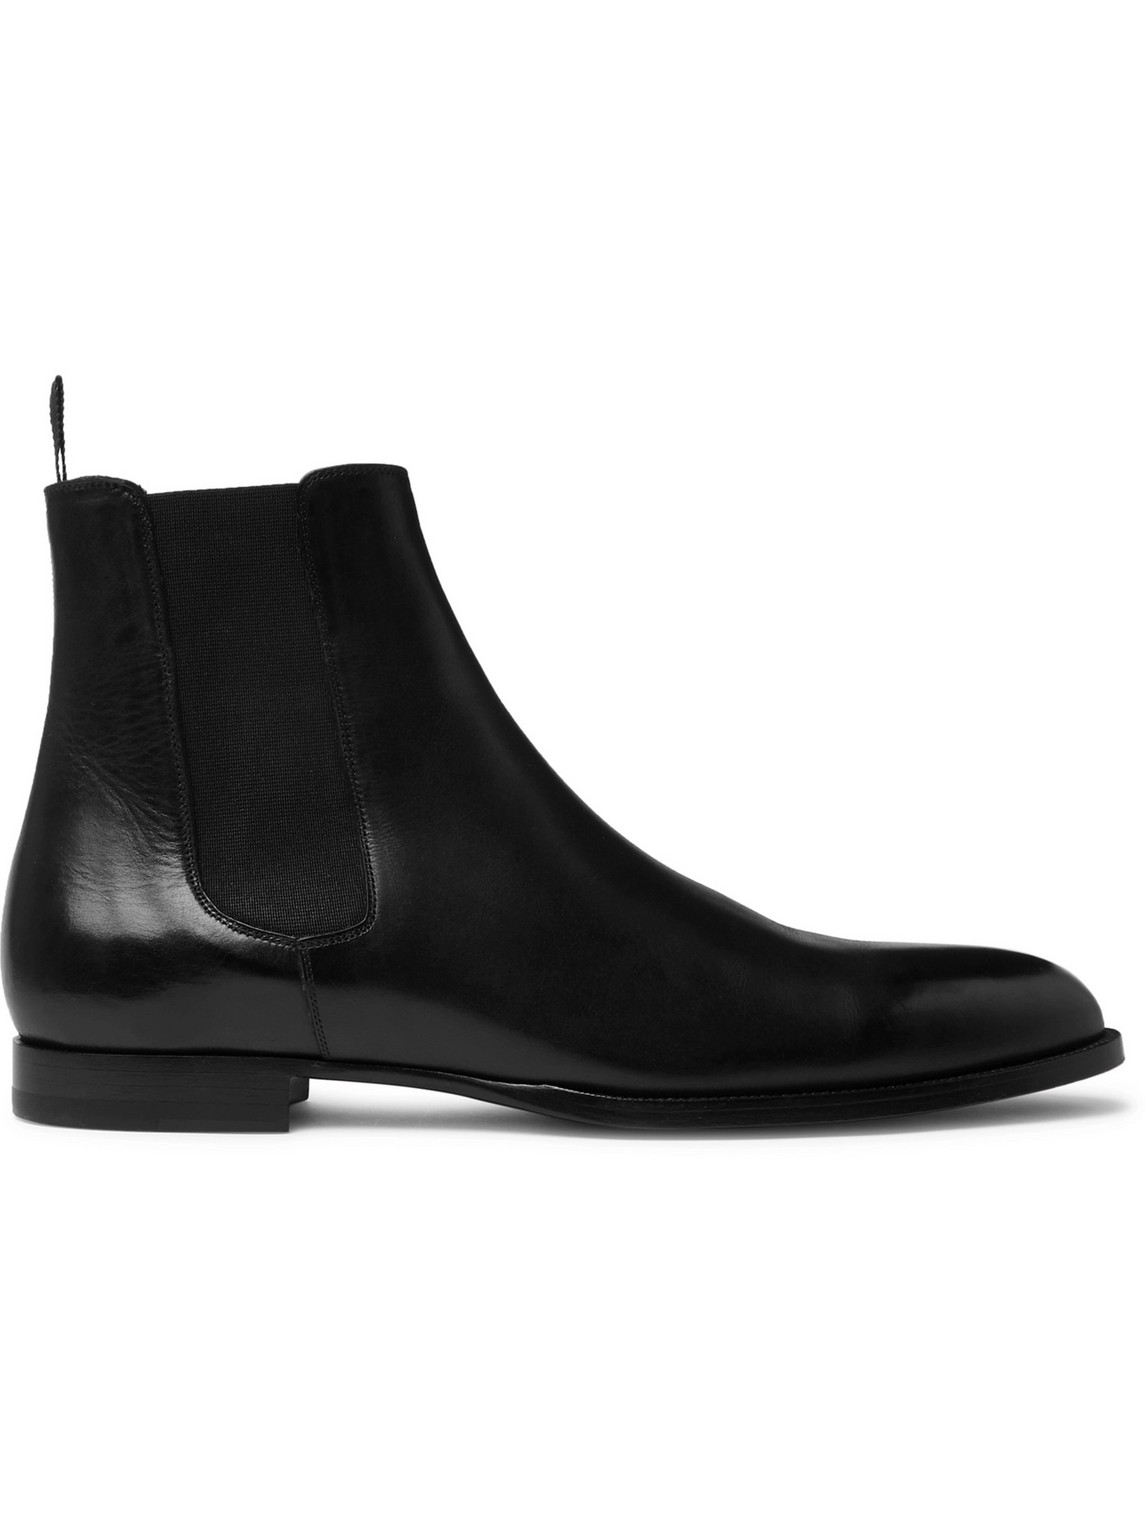 Celine Leather Chelsea Boots In Black | ModeSens